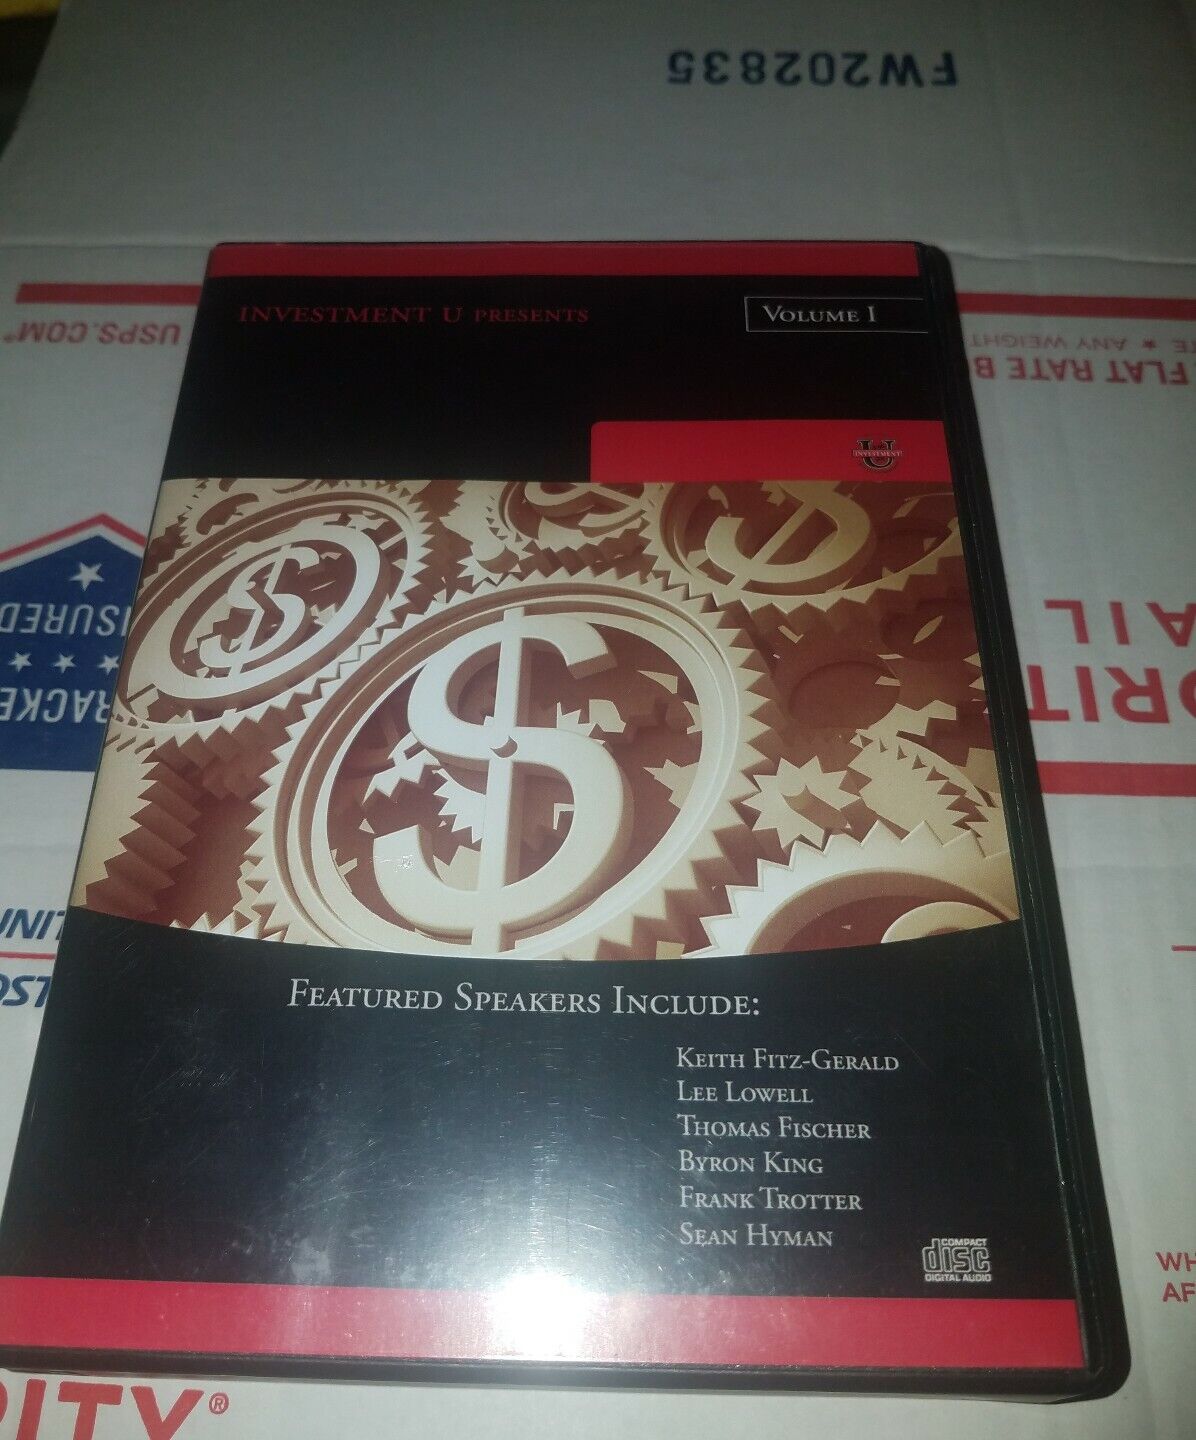 Investment U Presents The 12th Annual Investment University Conference Vol. 1 CD